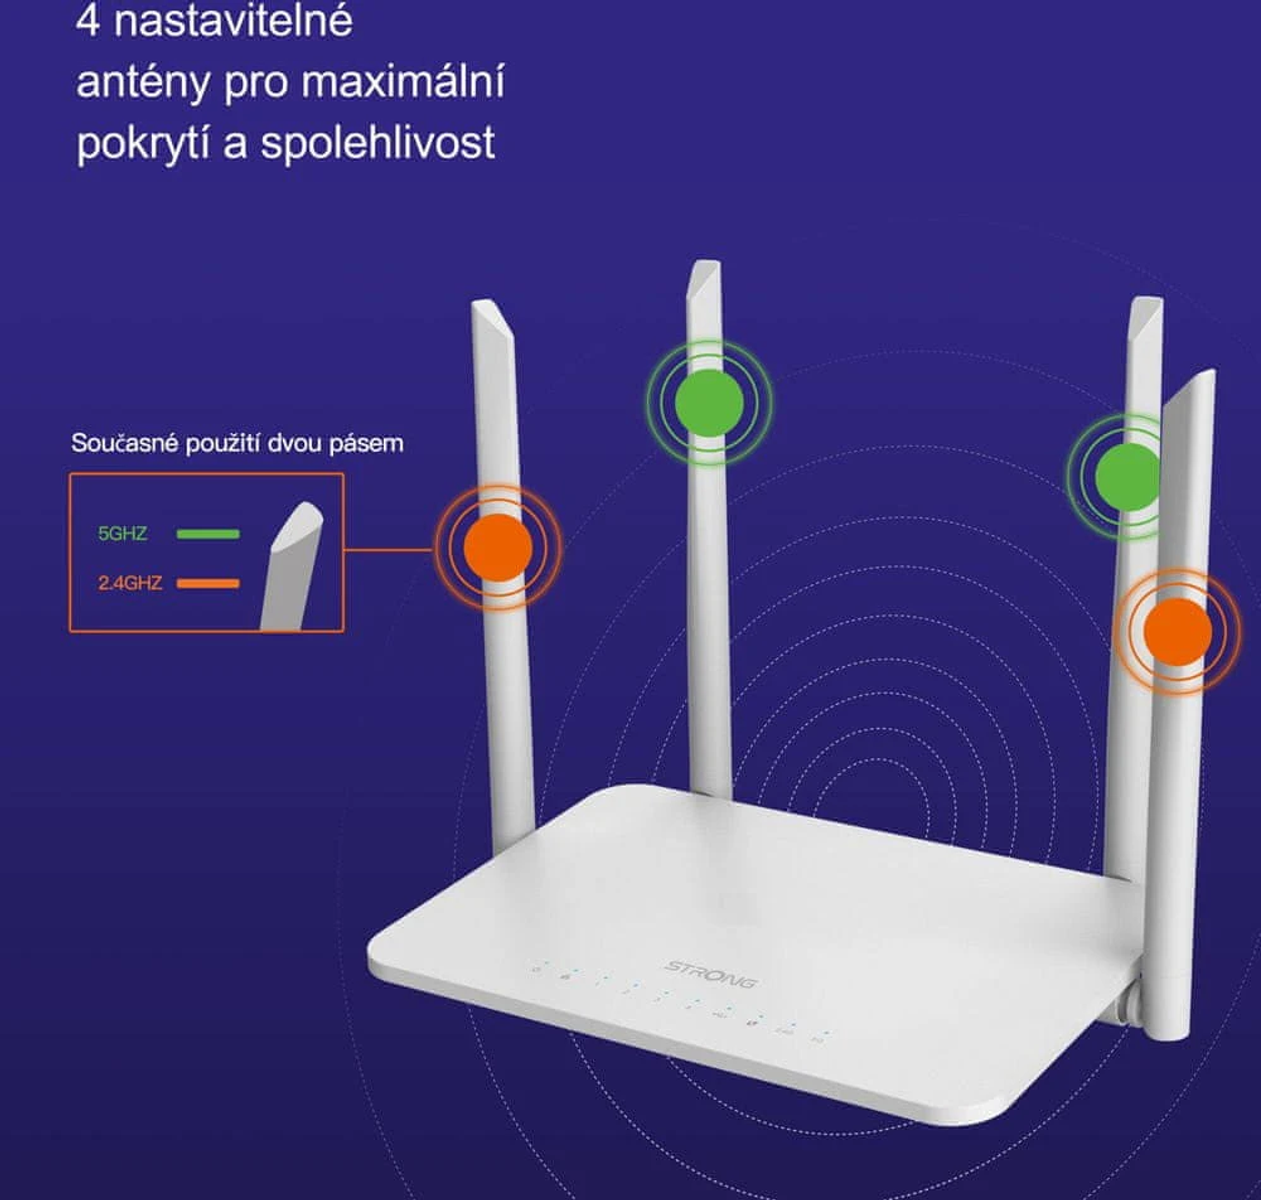 WLAN STRONG ROUTER1200S Router